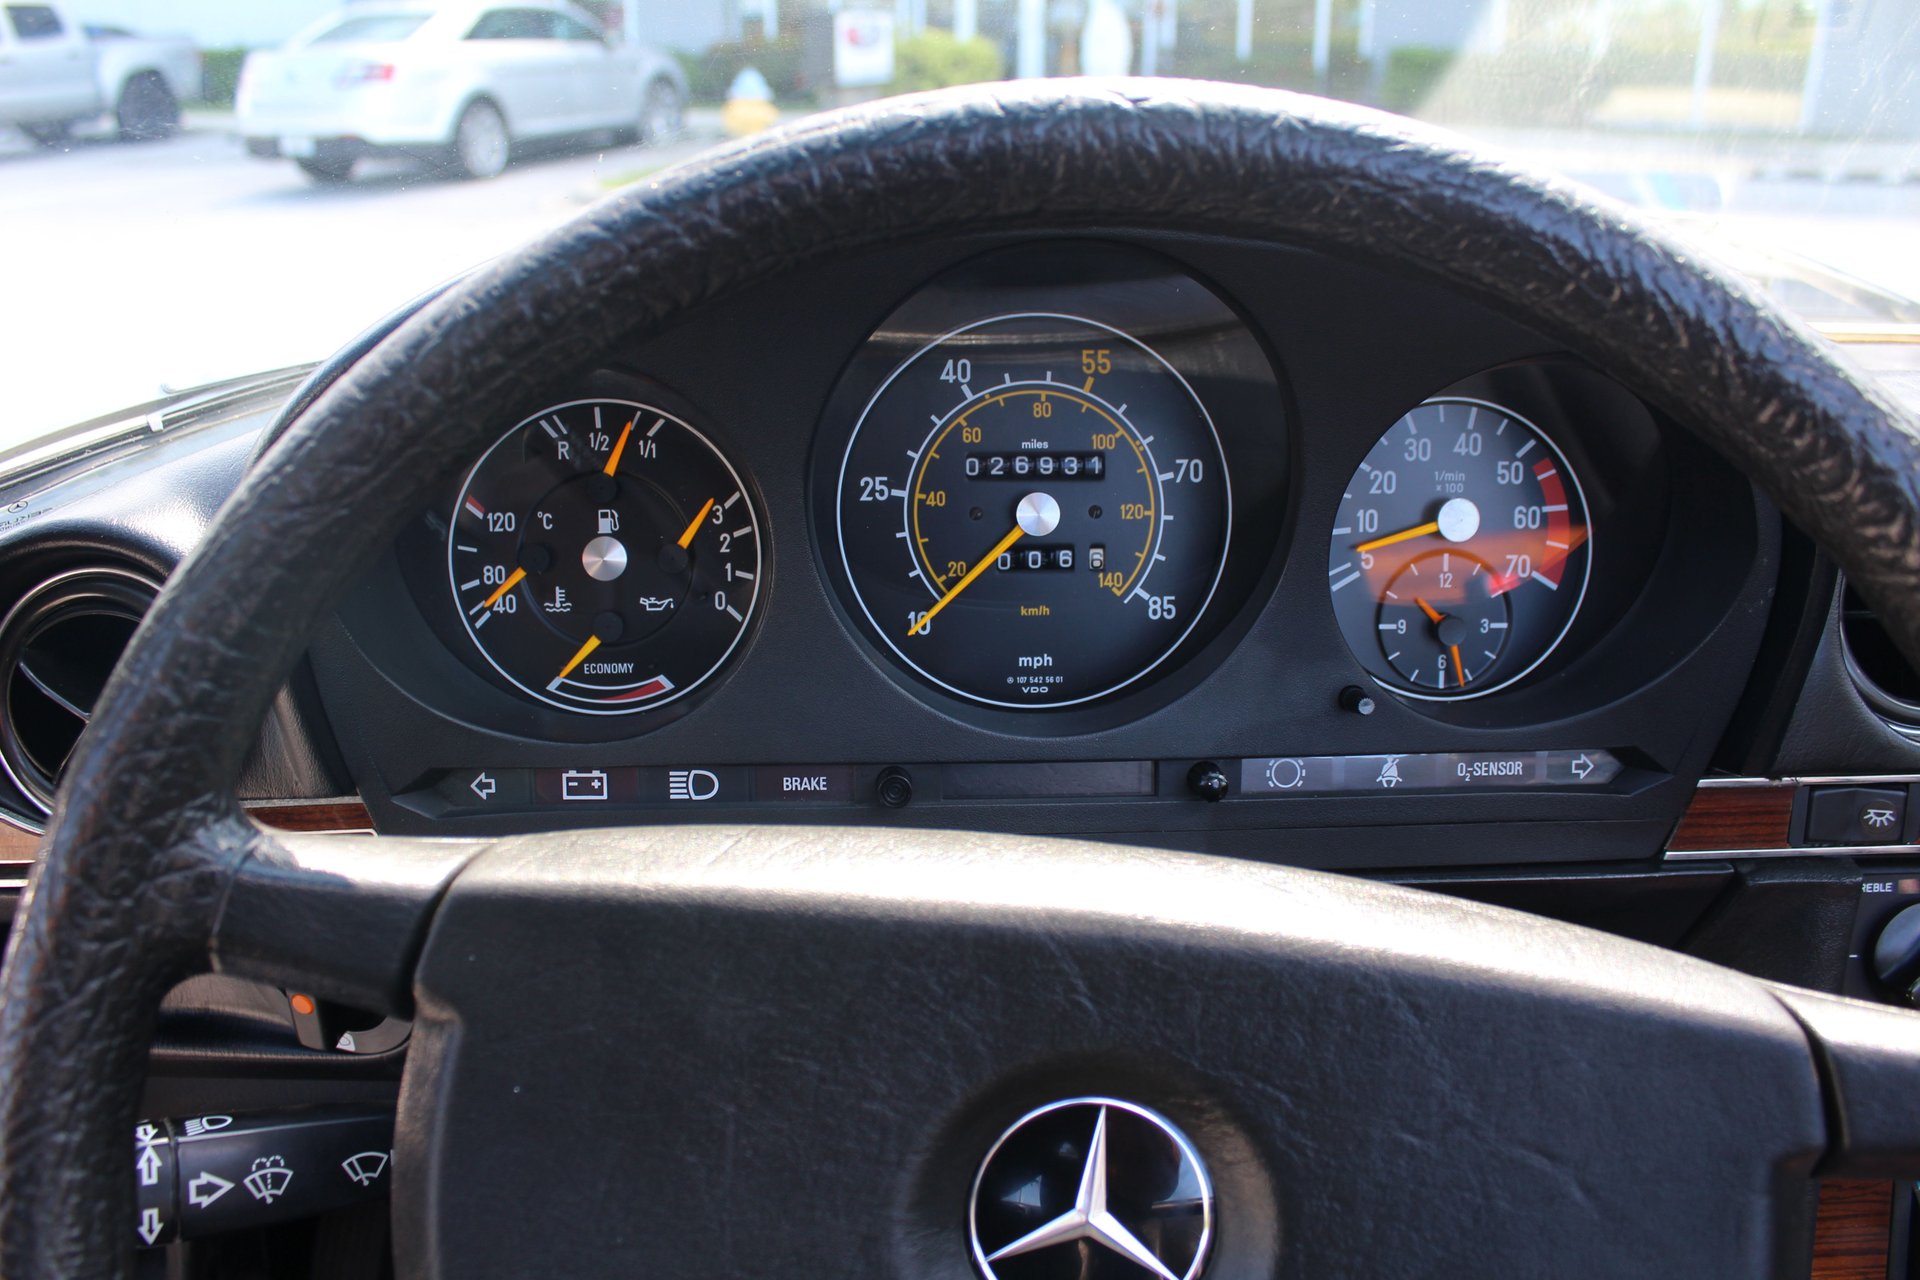 For Sale 1981 Mercedes SL 380